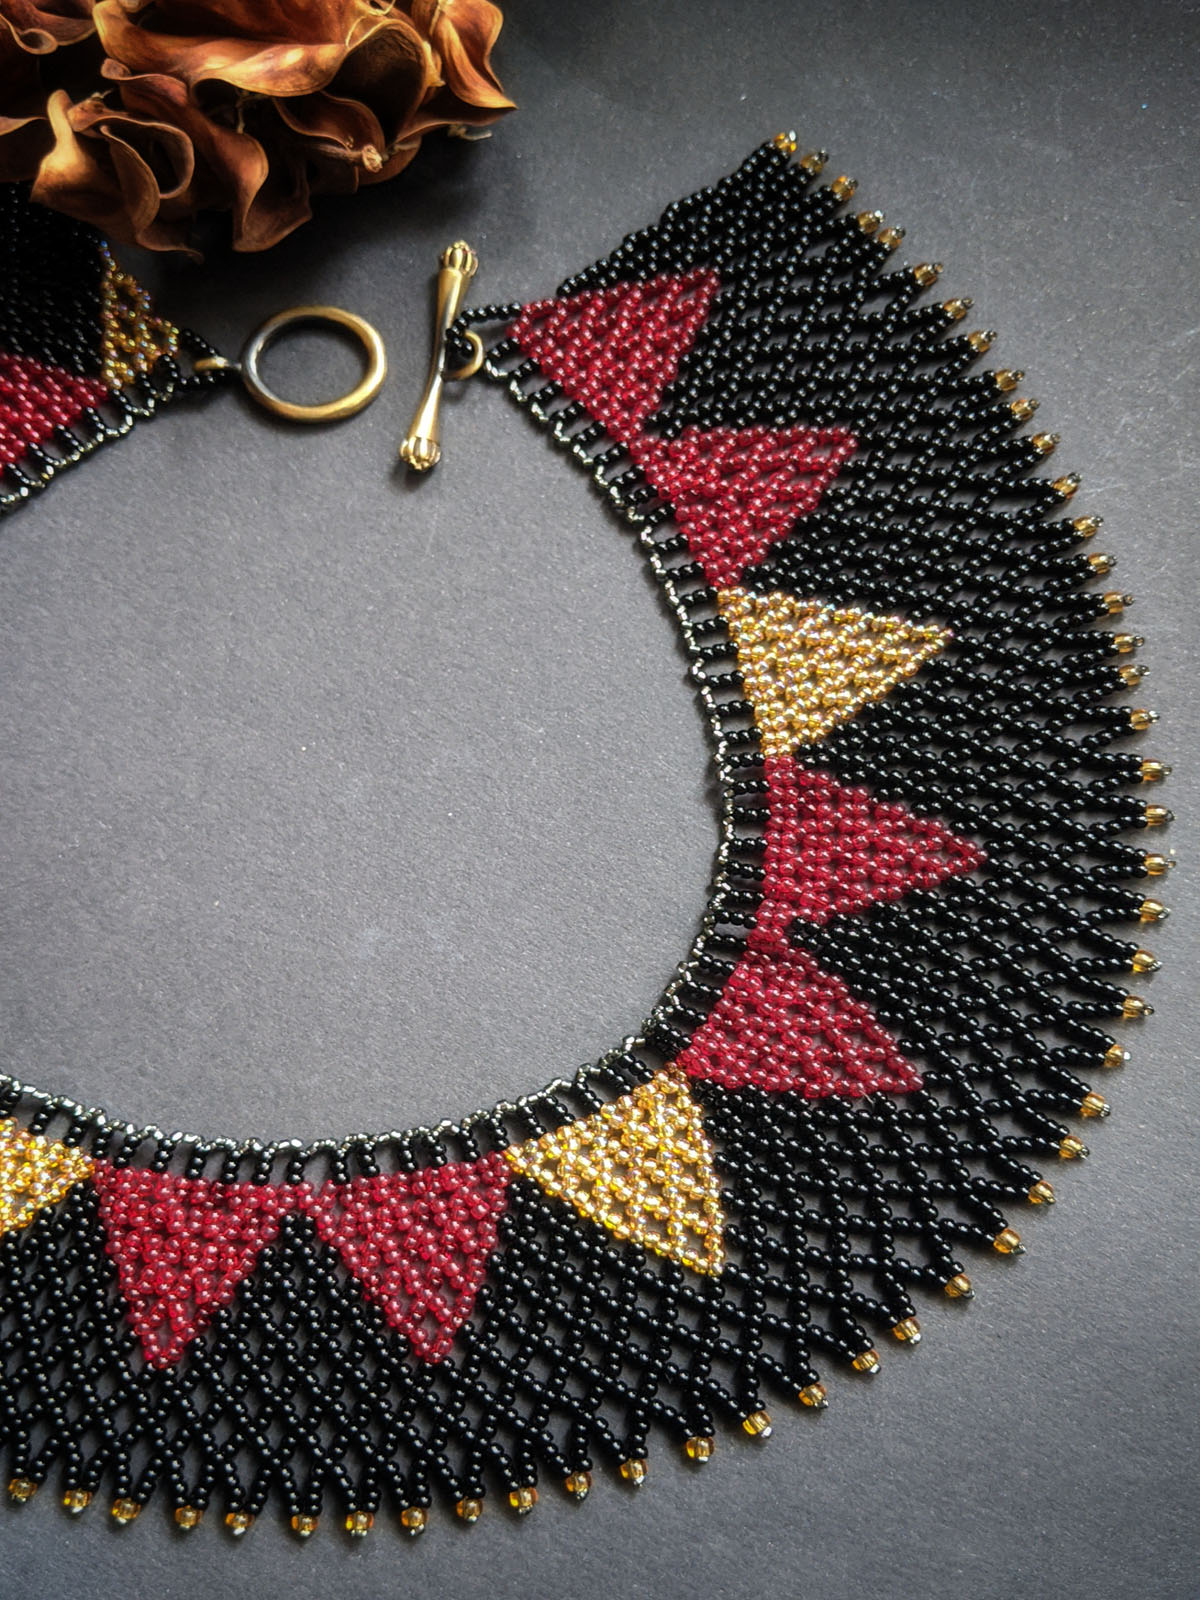 Handmade Beaded Necklace in Black & Red - Collar Necklace